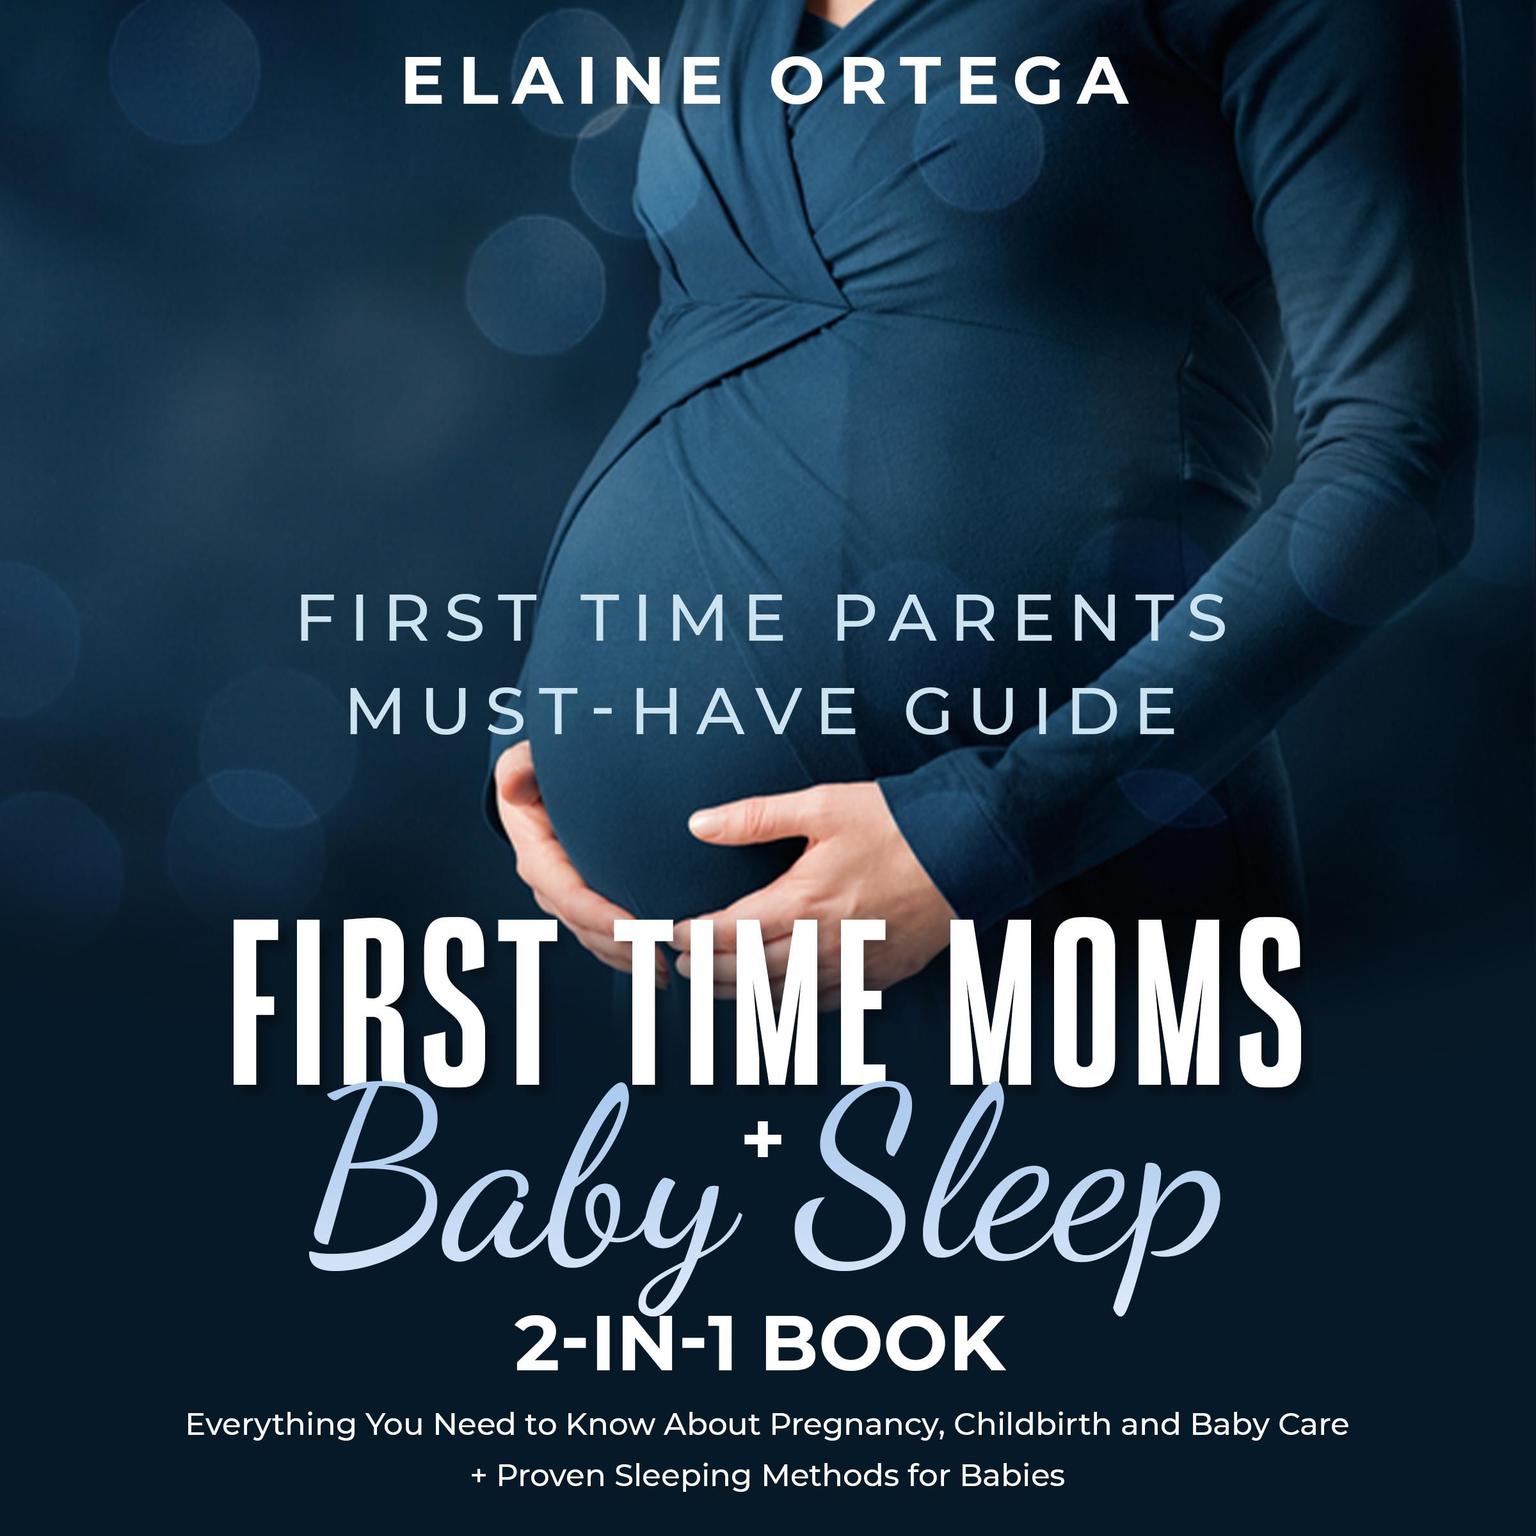 First Time Parents Must-Have Guide: First Time Moms + Baby Sleep 2-in-1 Book Audiobook, by Elaine Ortega